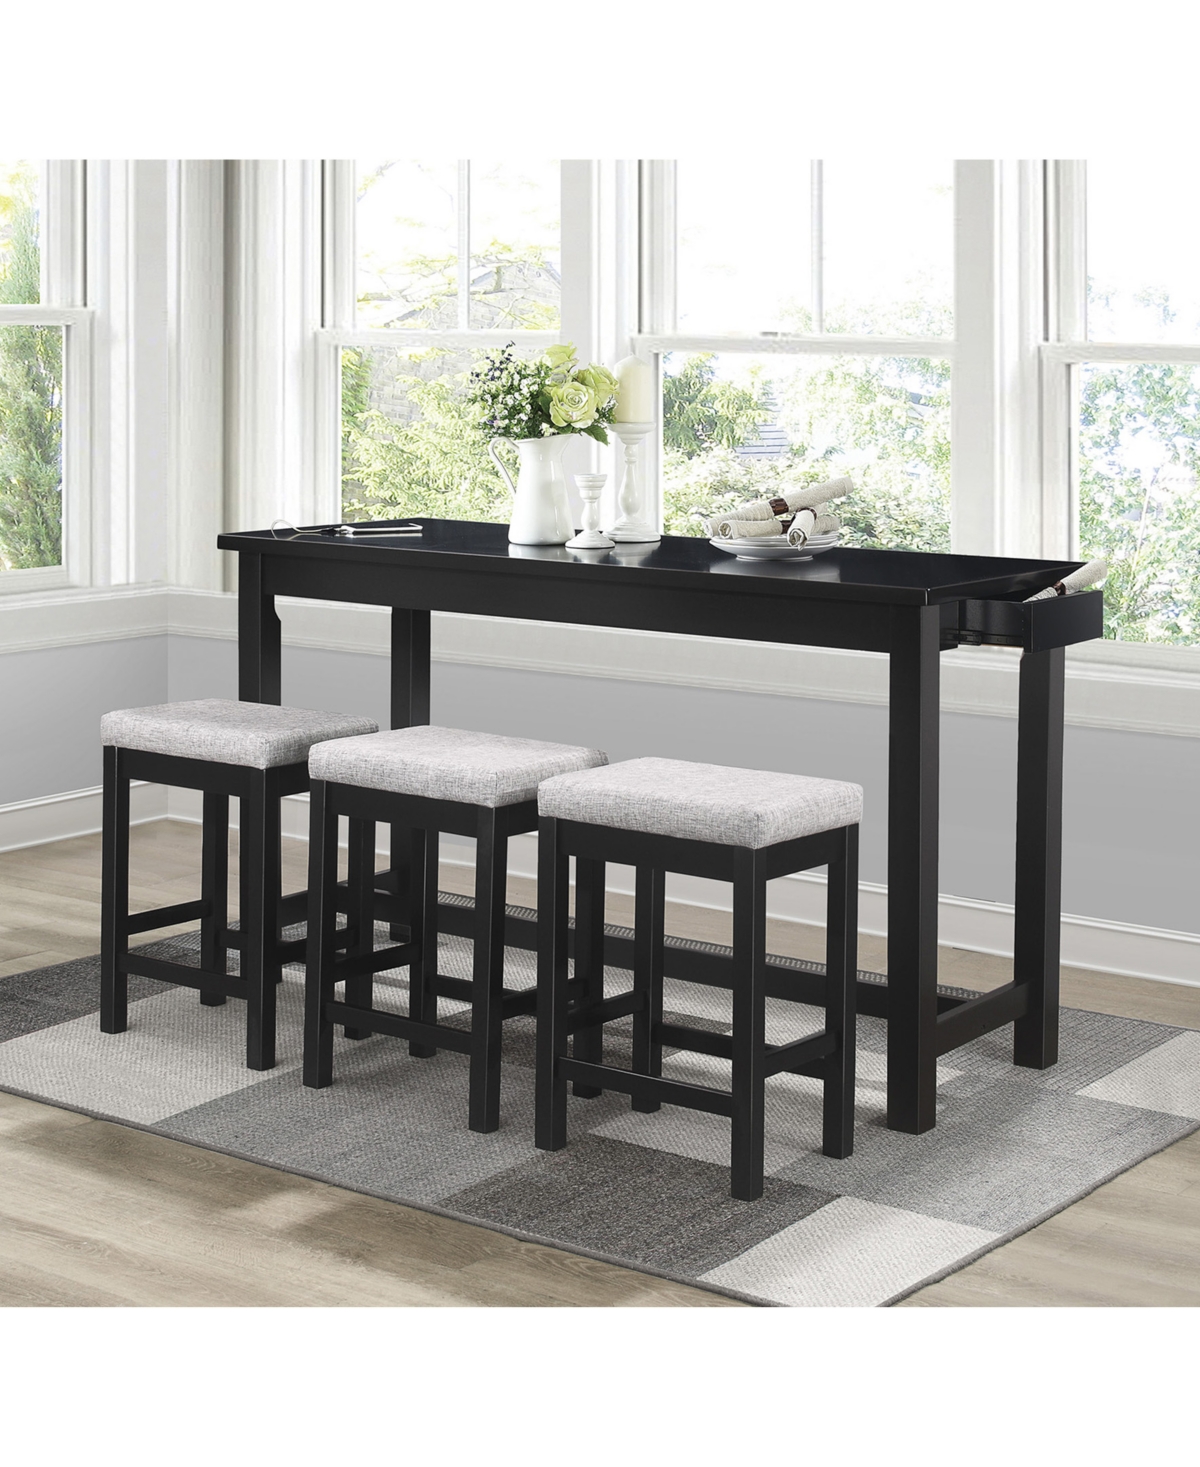 Baresford Counter Height Dining Set